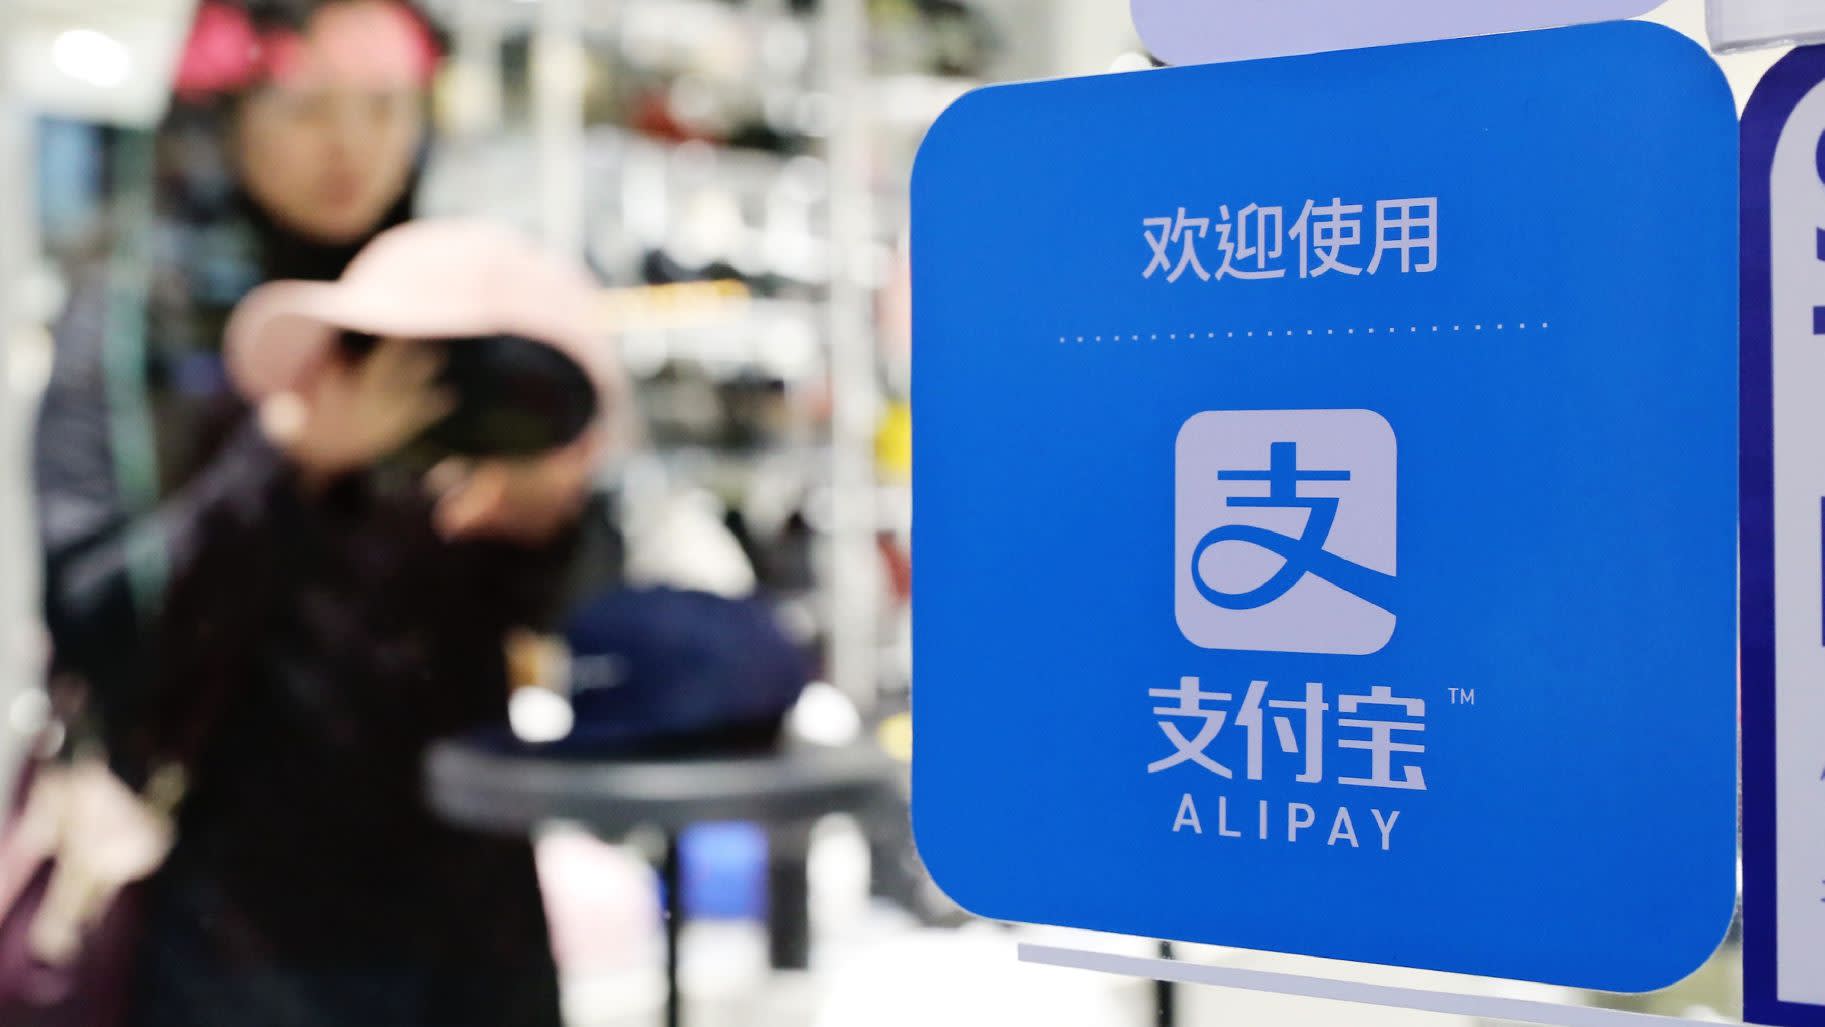 Tencent New Logo - Alibaba and Tencent hit by China's new mobile payment rules - Nikkei ...